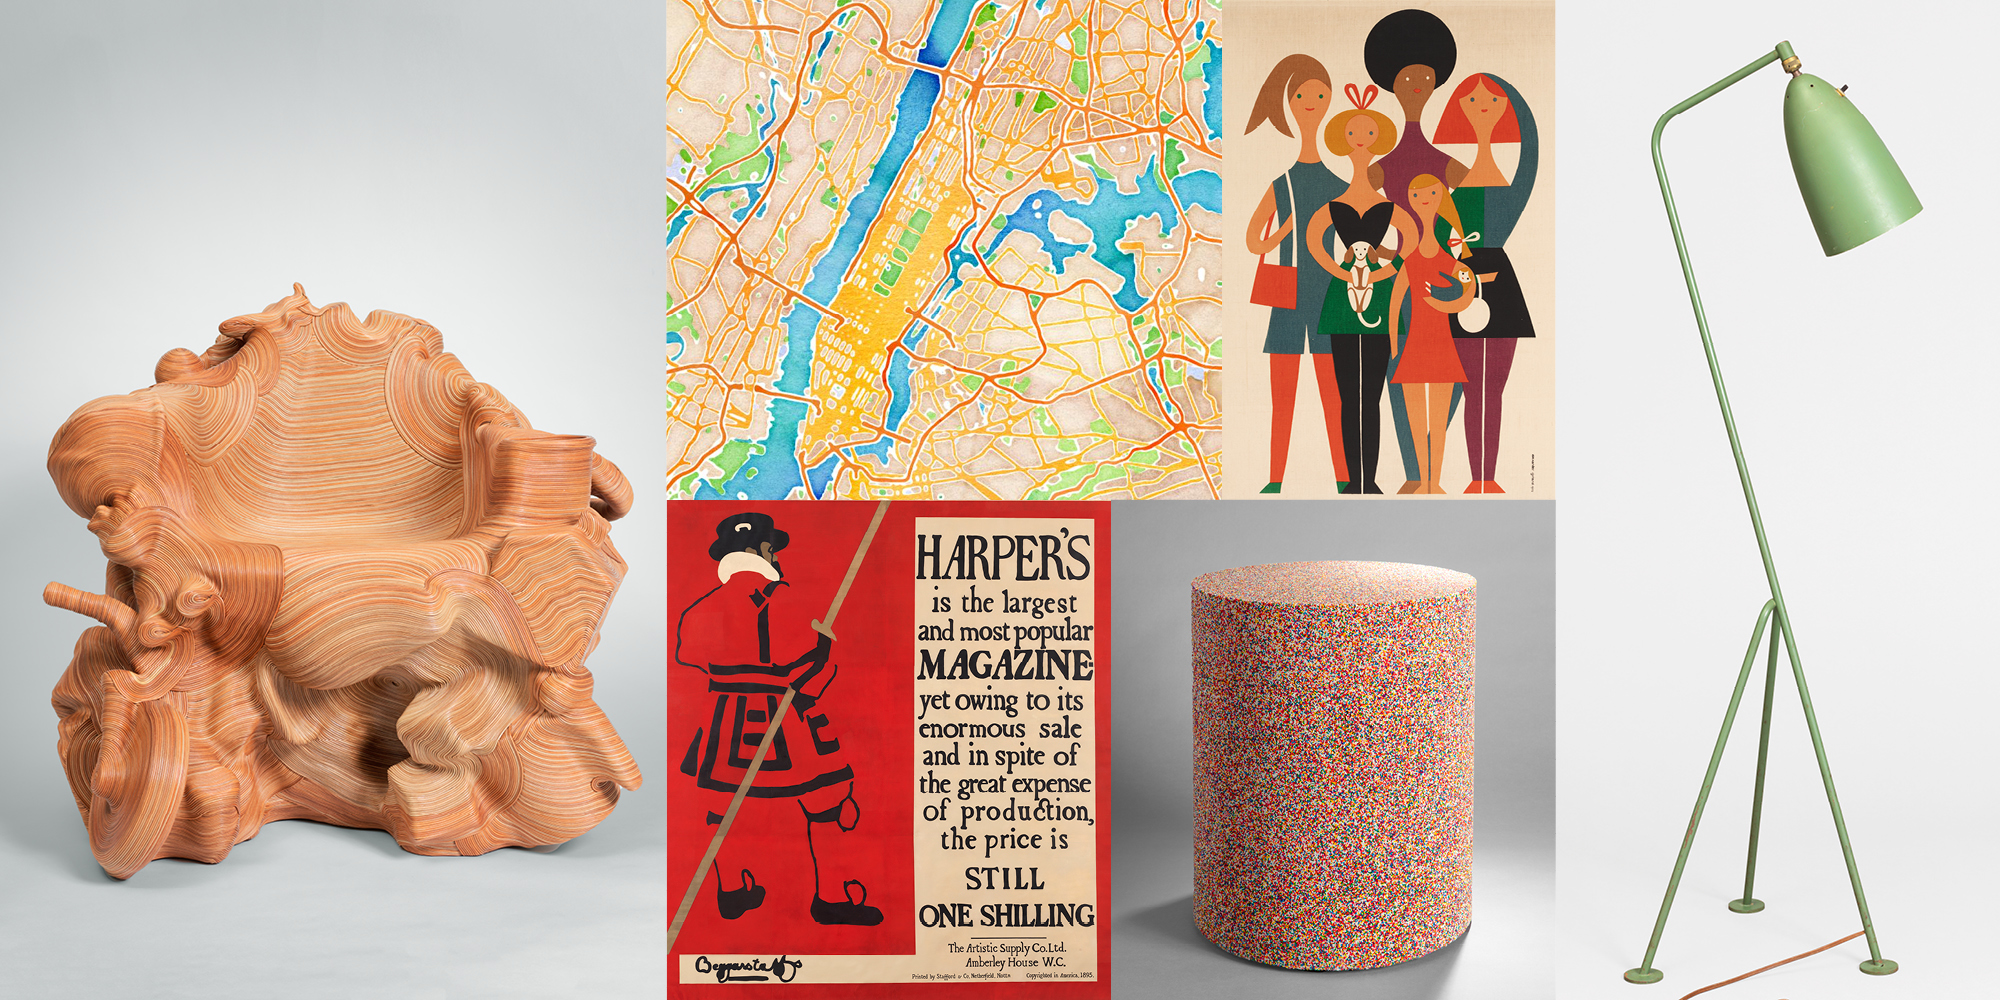 A grid of objects in Cooper Hewitt's collection, showing the breadth and depth of the museum's holdings. Objects include a chair, map, poster, stool and green lamp.